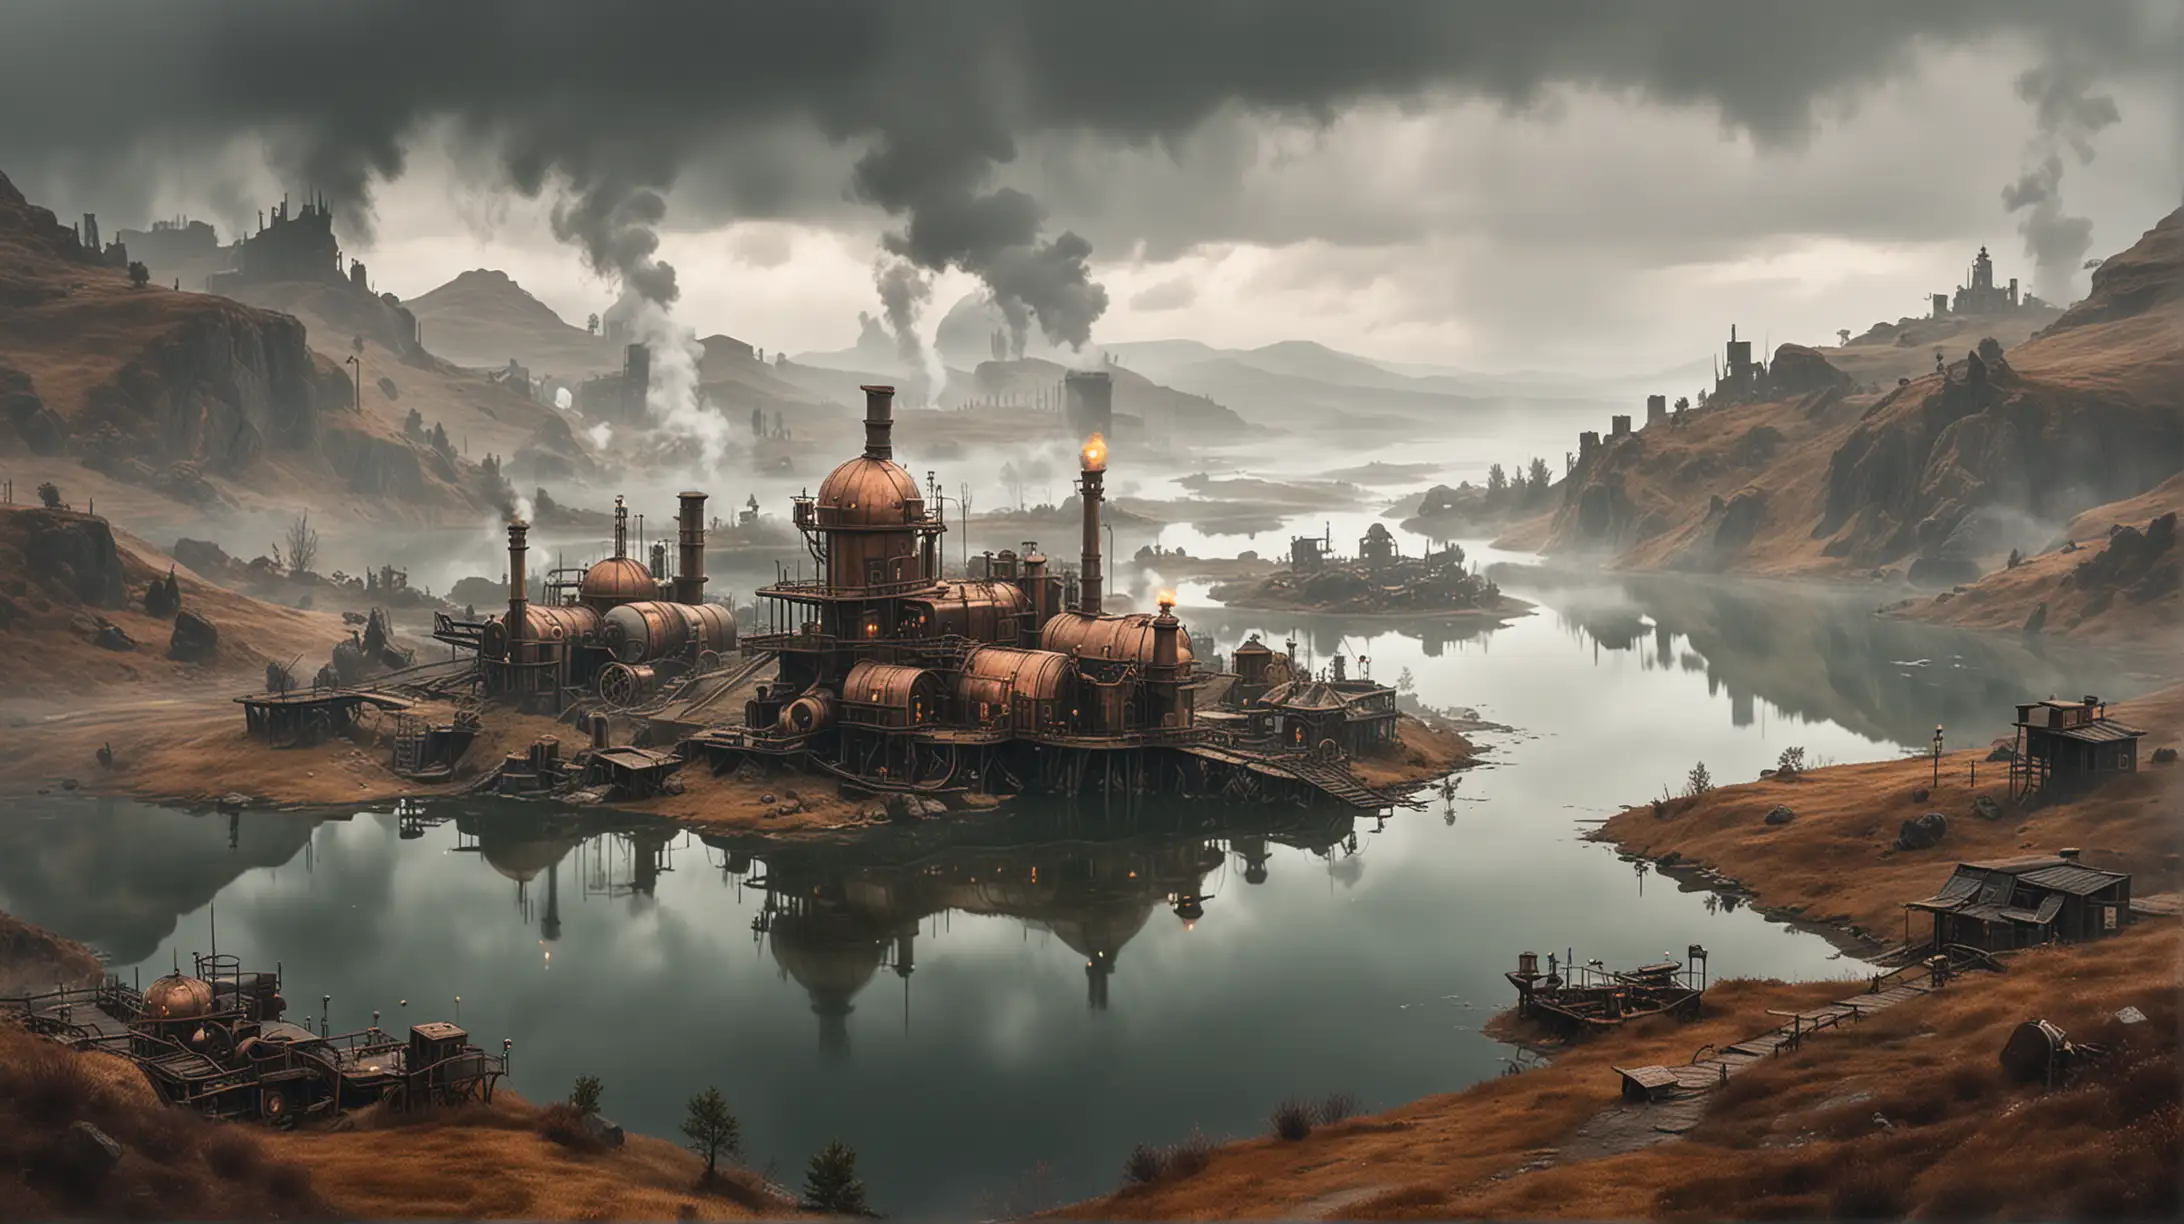 Steampunk Colony Between Wild Lakes Enigmatic Setting with Steam Fog and Copper